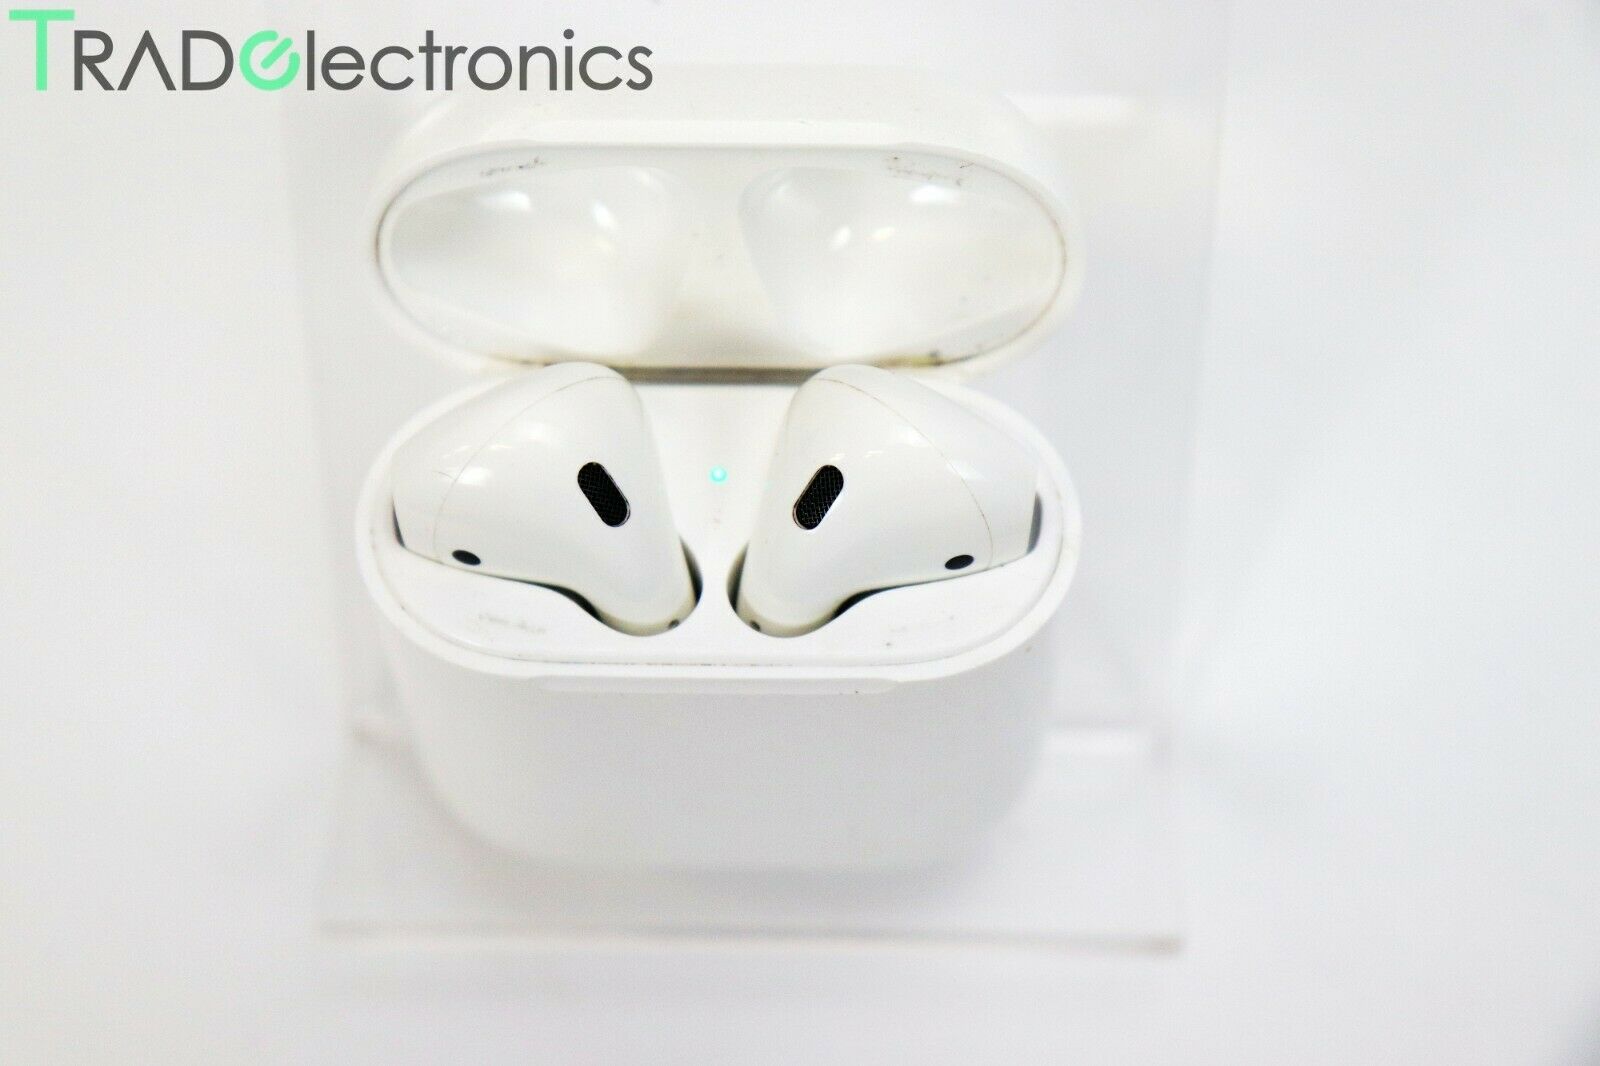 Airpods mpny3. A1602 AIRPODS. Apple AIRPODS 3 Lightning Charging Case (mpny3am) белый. А1602 AIRPODS цена.